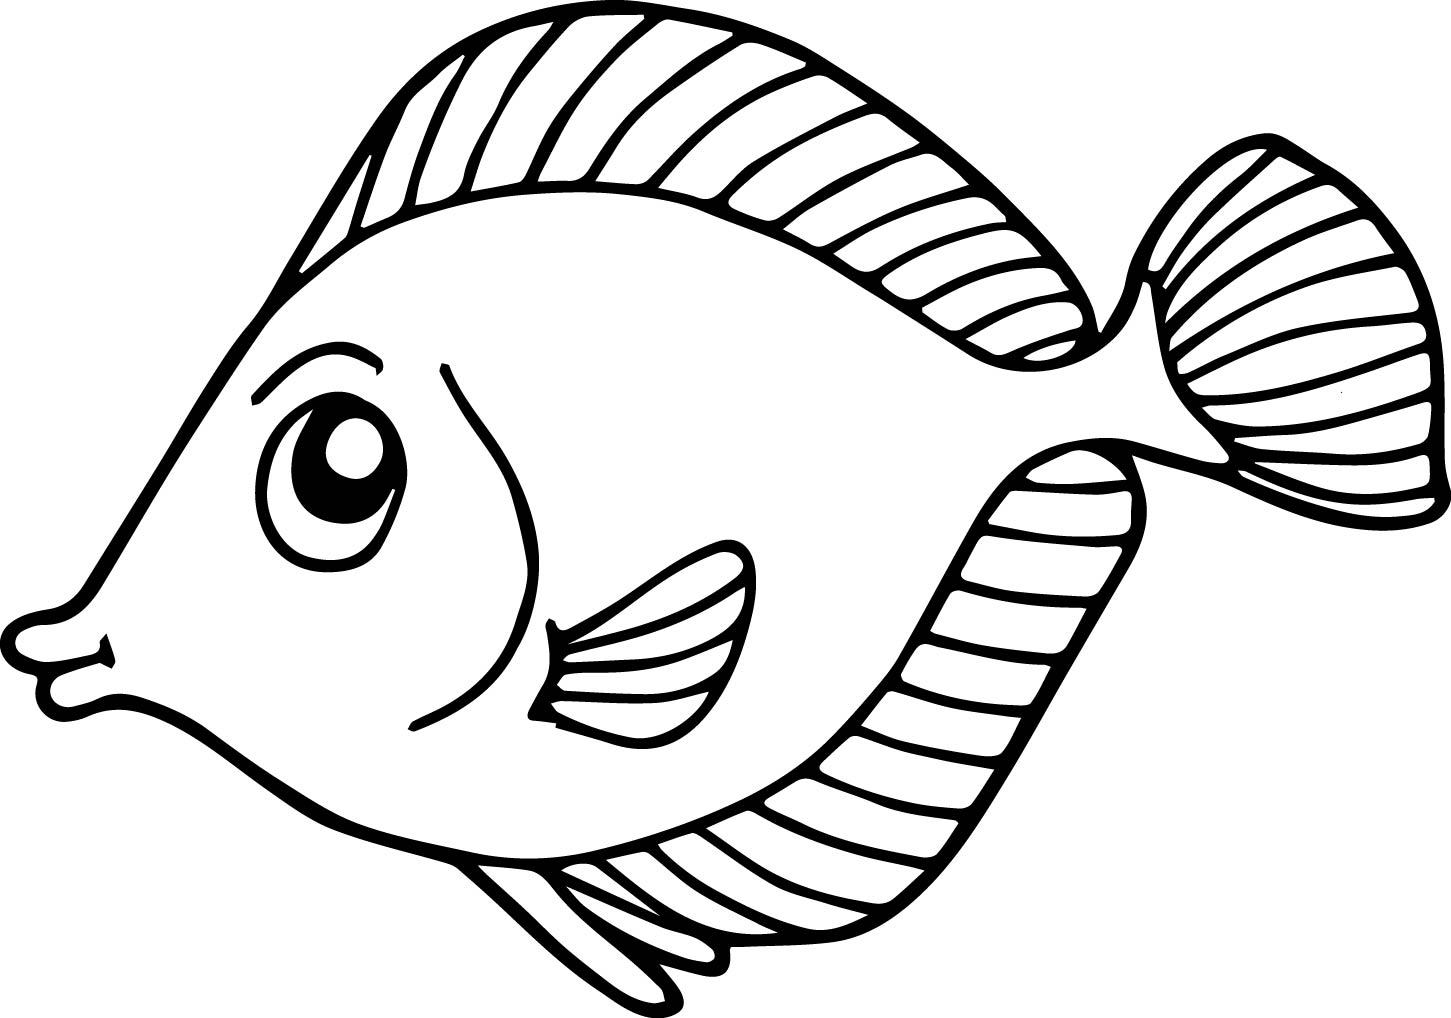 fish-coloring-pages-for-kids-preschool-and-kindergarten